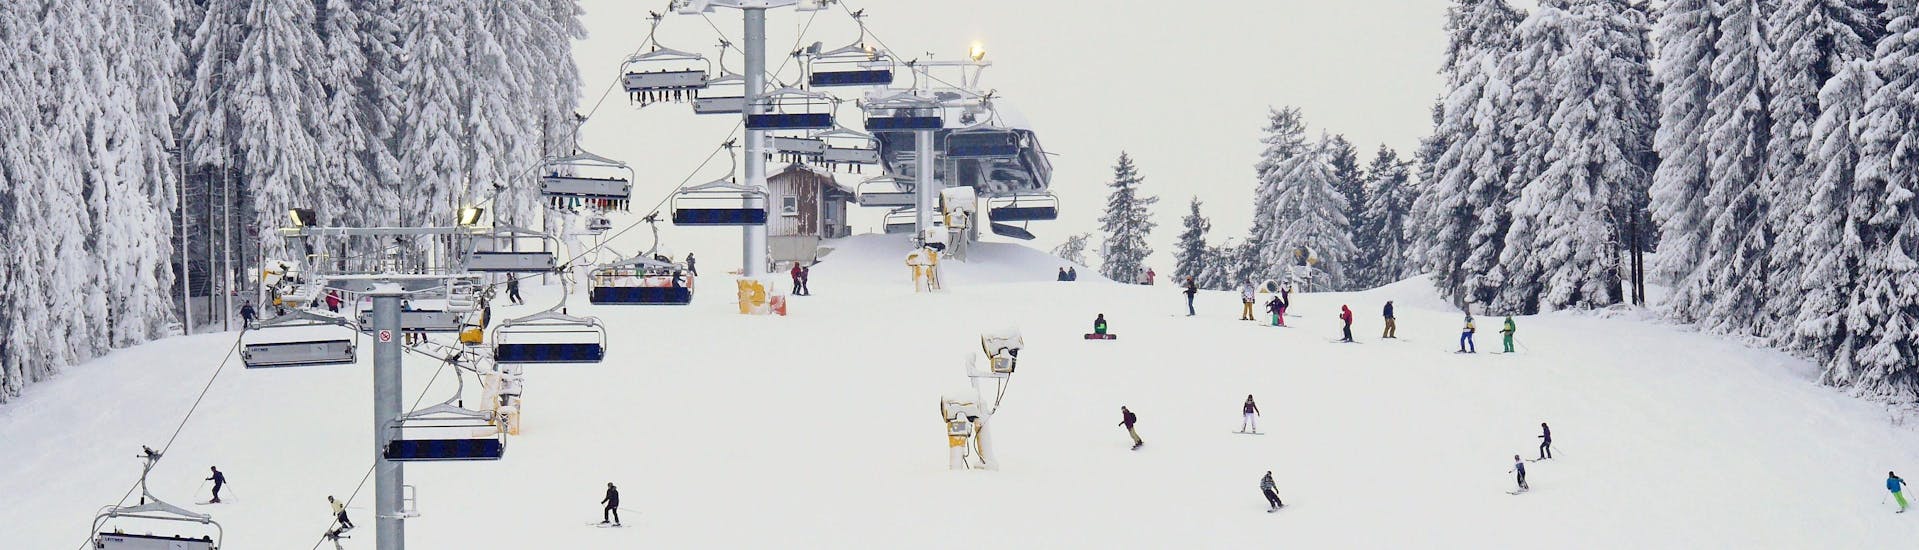 A view of a snowy mountain top in the ski resort of Winterberg (Schlossberg), where ski schools gather to start their ski lessons.